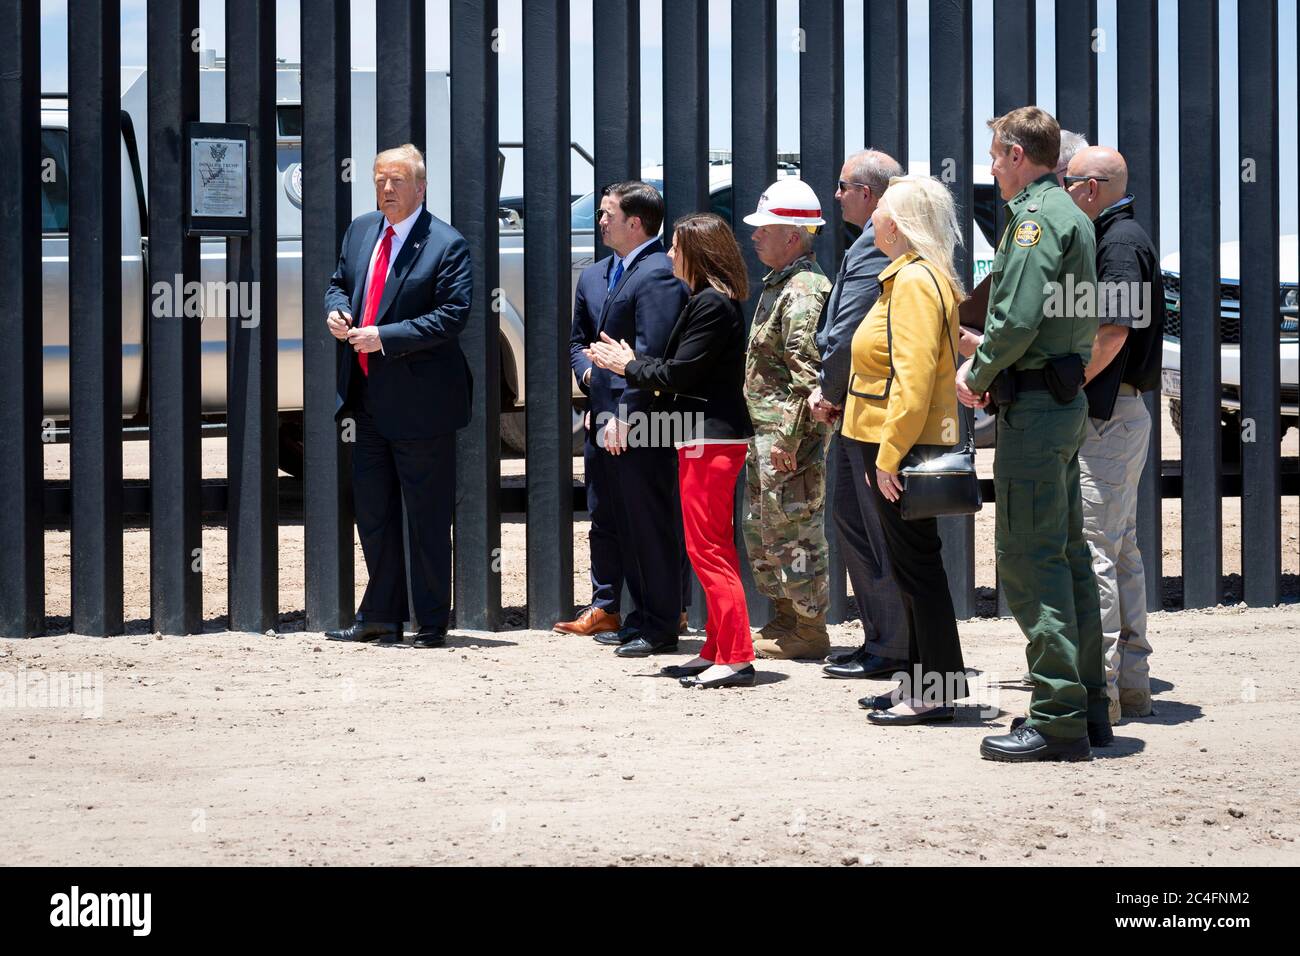 U.S. President Donald Trump along with Acting DHS Secretary Chad Wolf, Acting CBP Commissioner Mark Morgan, and Gov. Doug Ducey visit a new section of border wall along the Mexican-American border June 23, 2020 in San Luis, Arizona. The visit marked the completion of 200 miles of border wall, the majority of which is replacement for existing structure at a cost of $20-million dollars a mile. Stock Photo